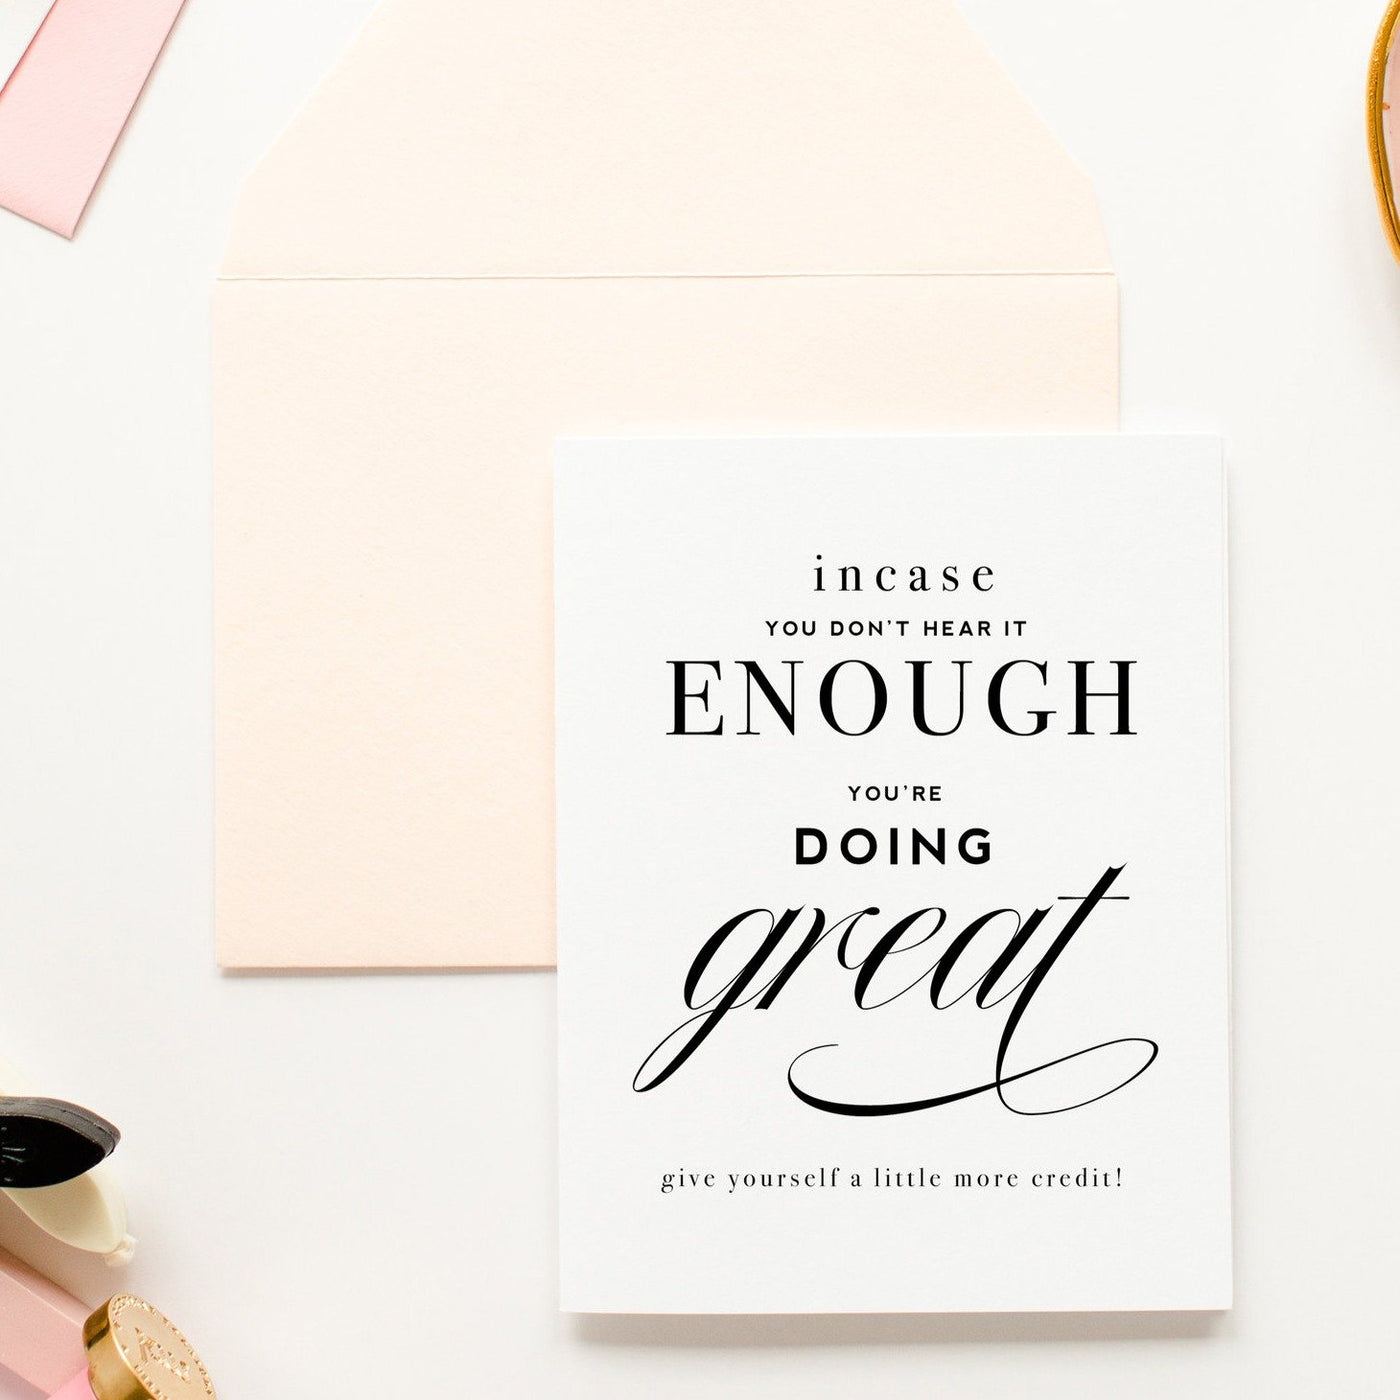 You're-Doing Great Encouragement Greeting Card